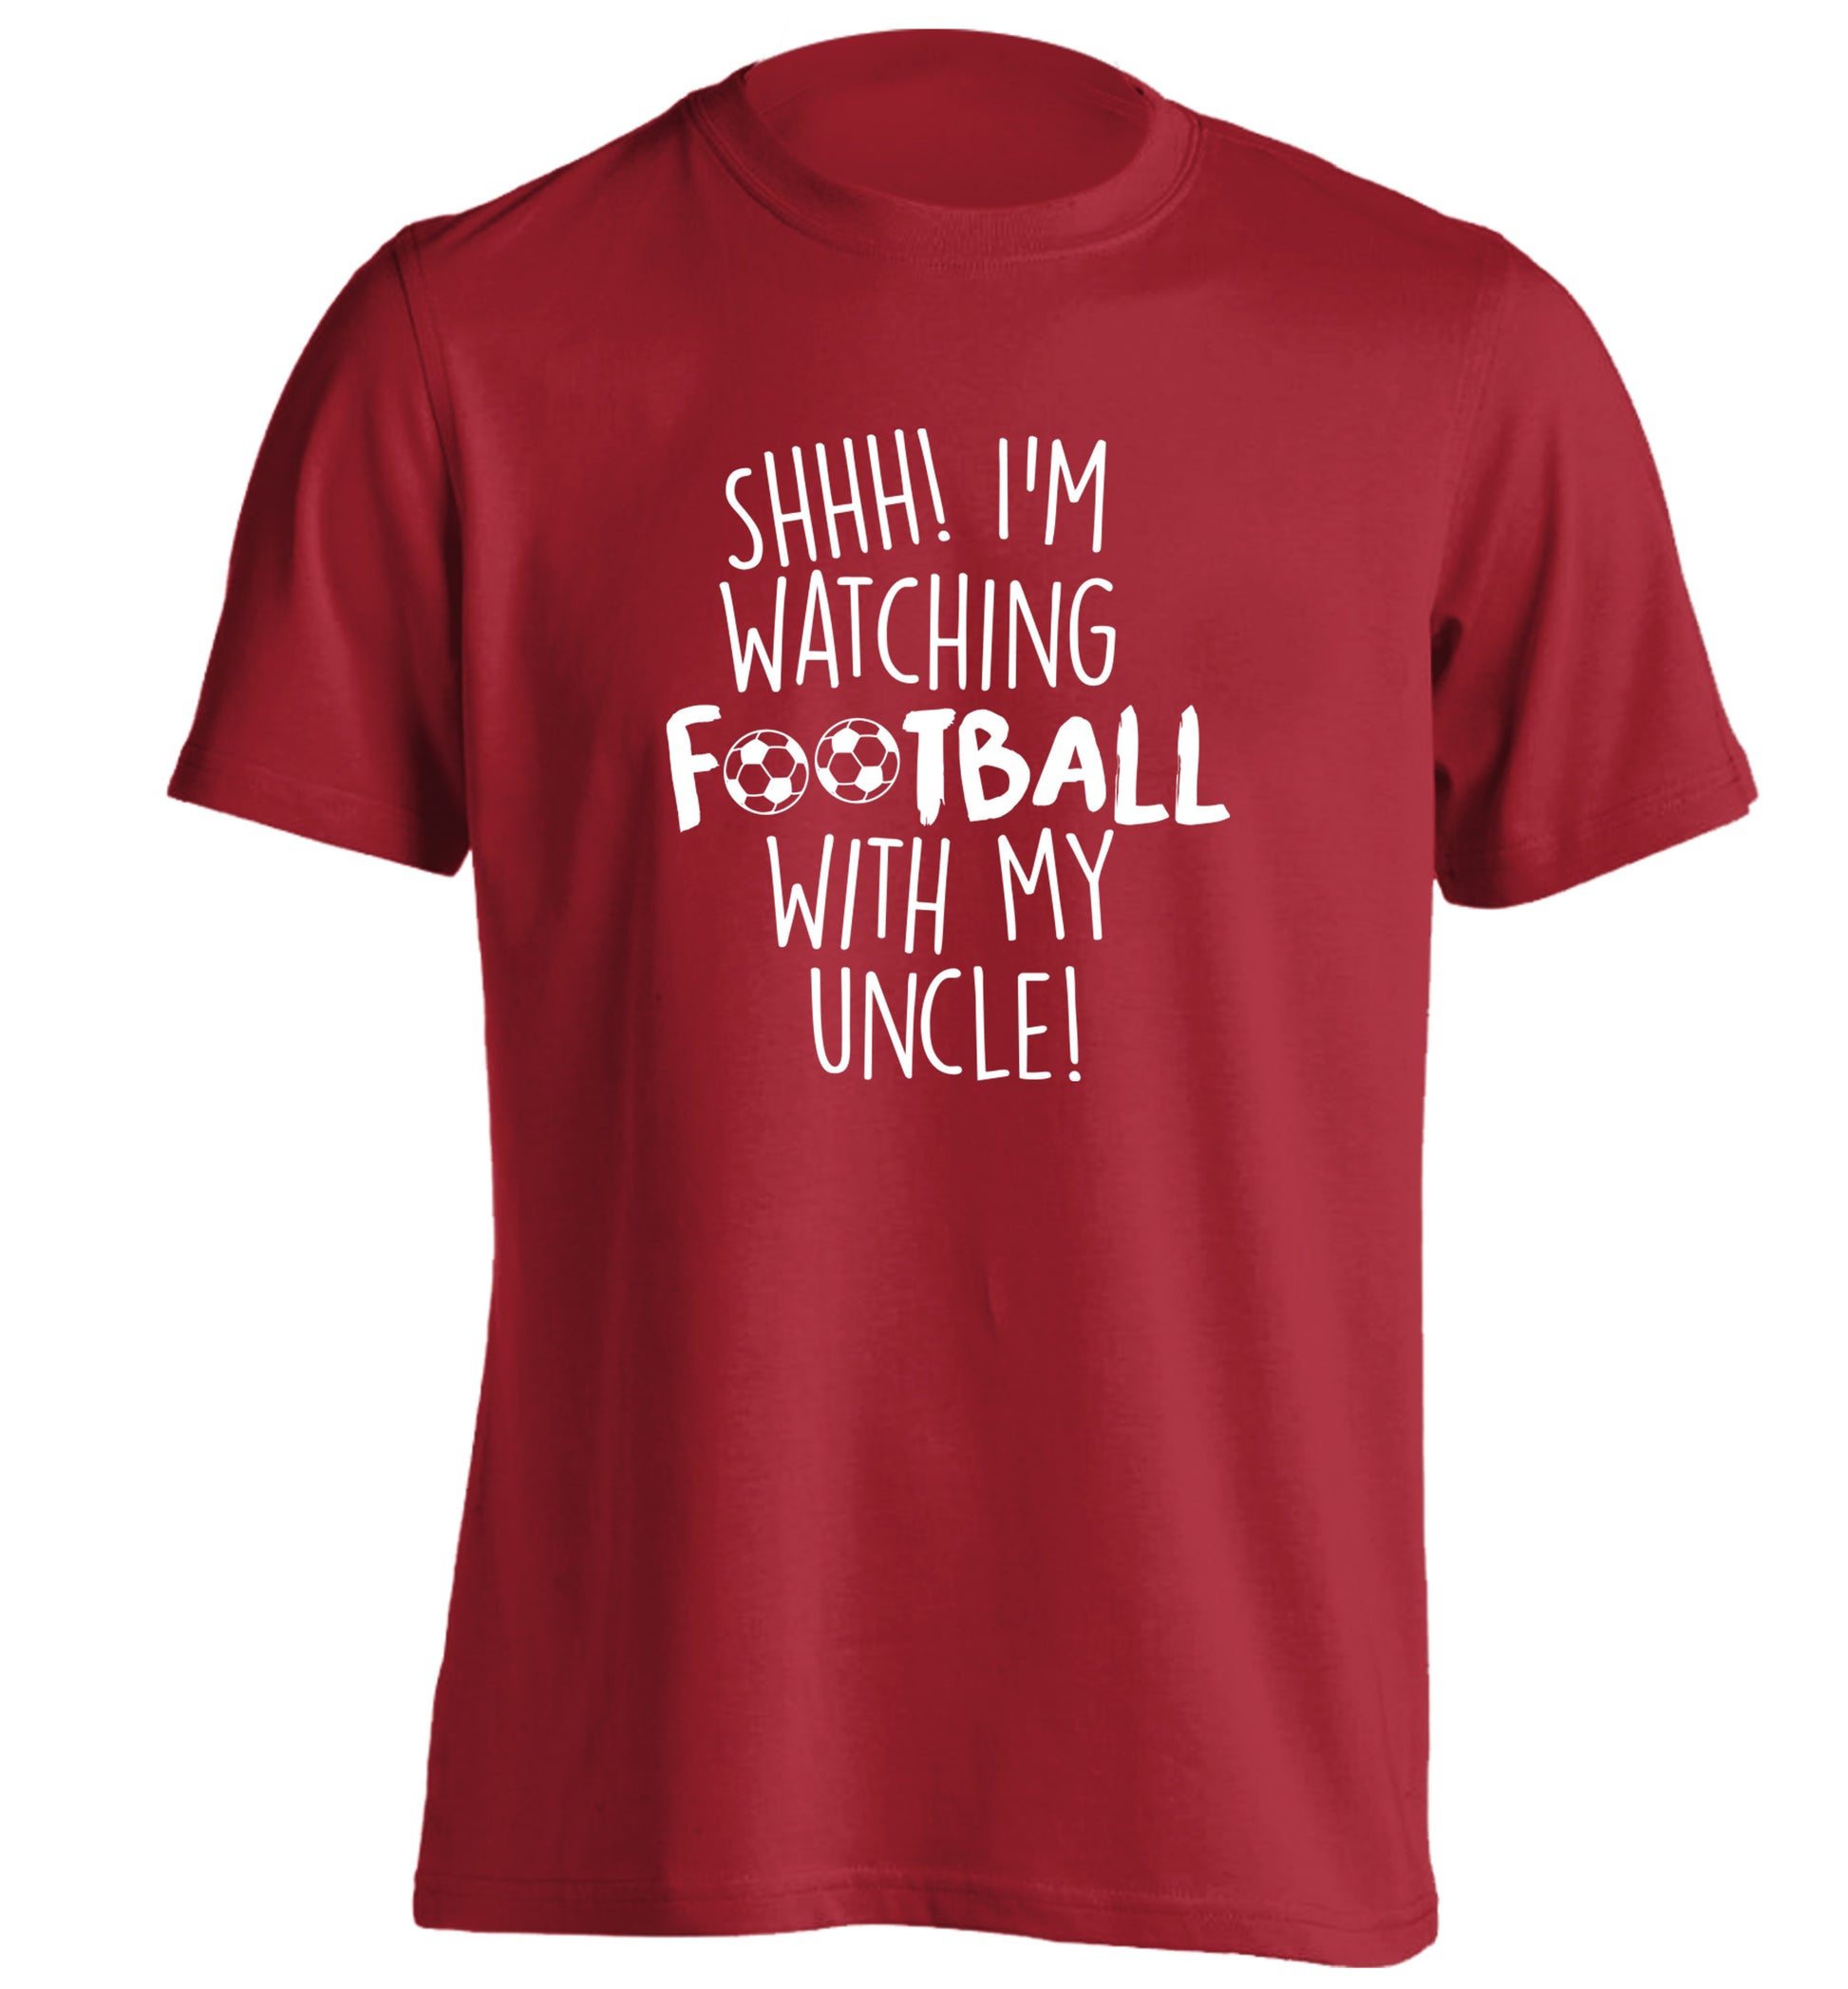 Shhh I'm watching football with my uncle adults unisexred Tshirt 2XL